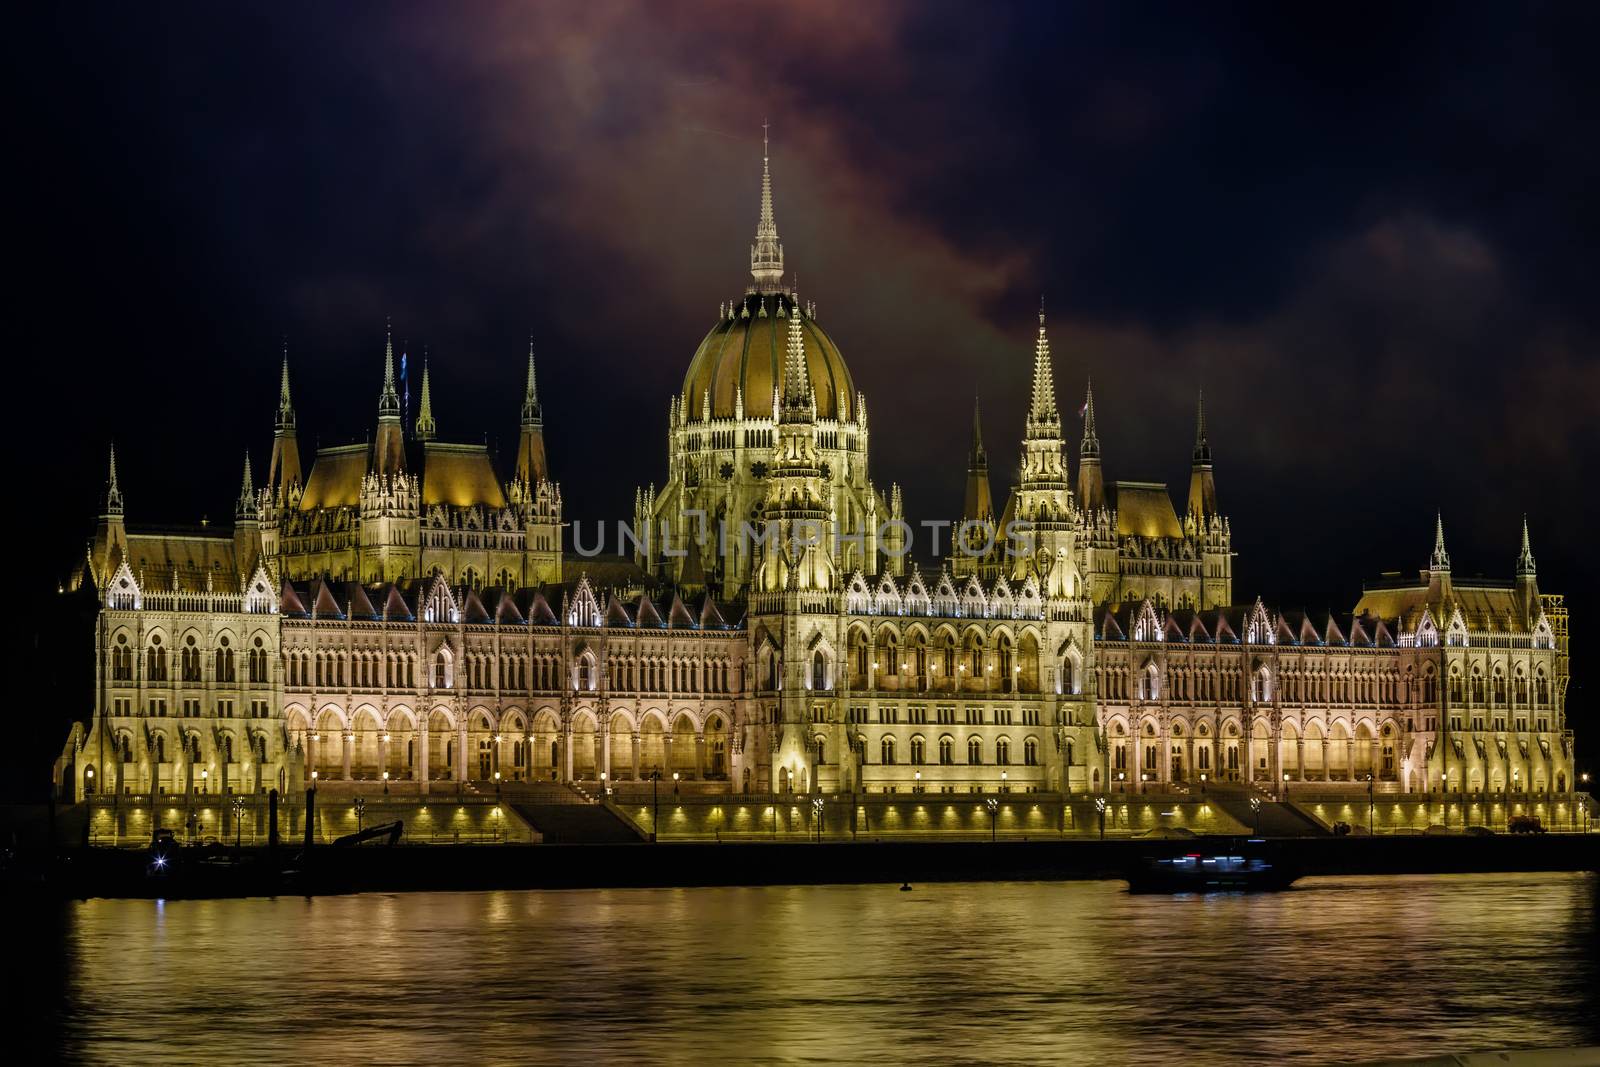 Hungarian parliament in Budapest at night by Roka